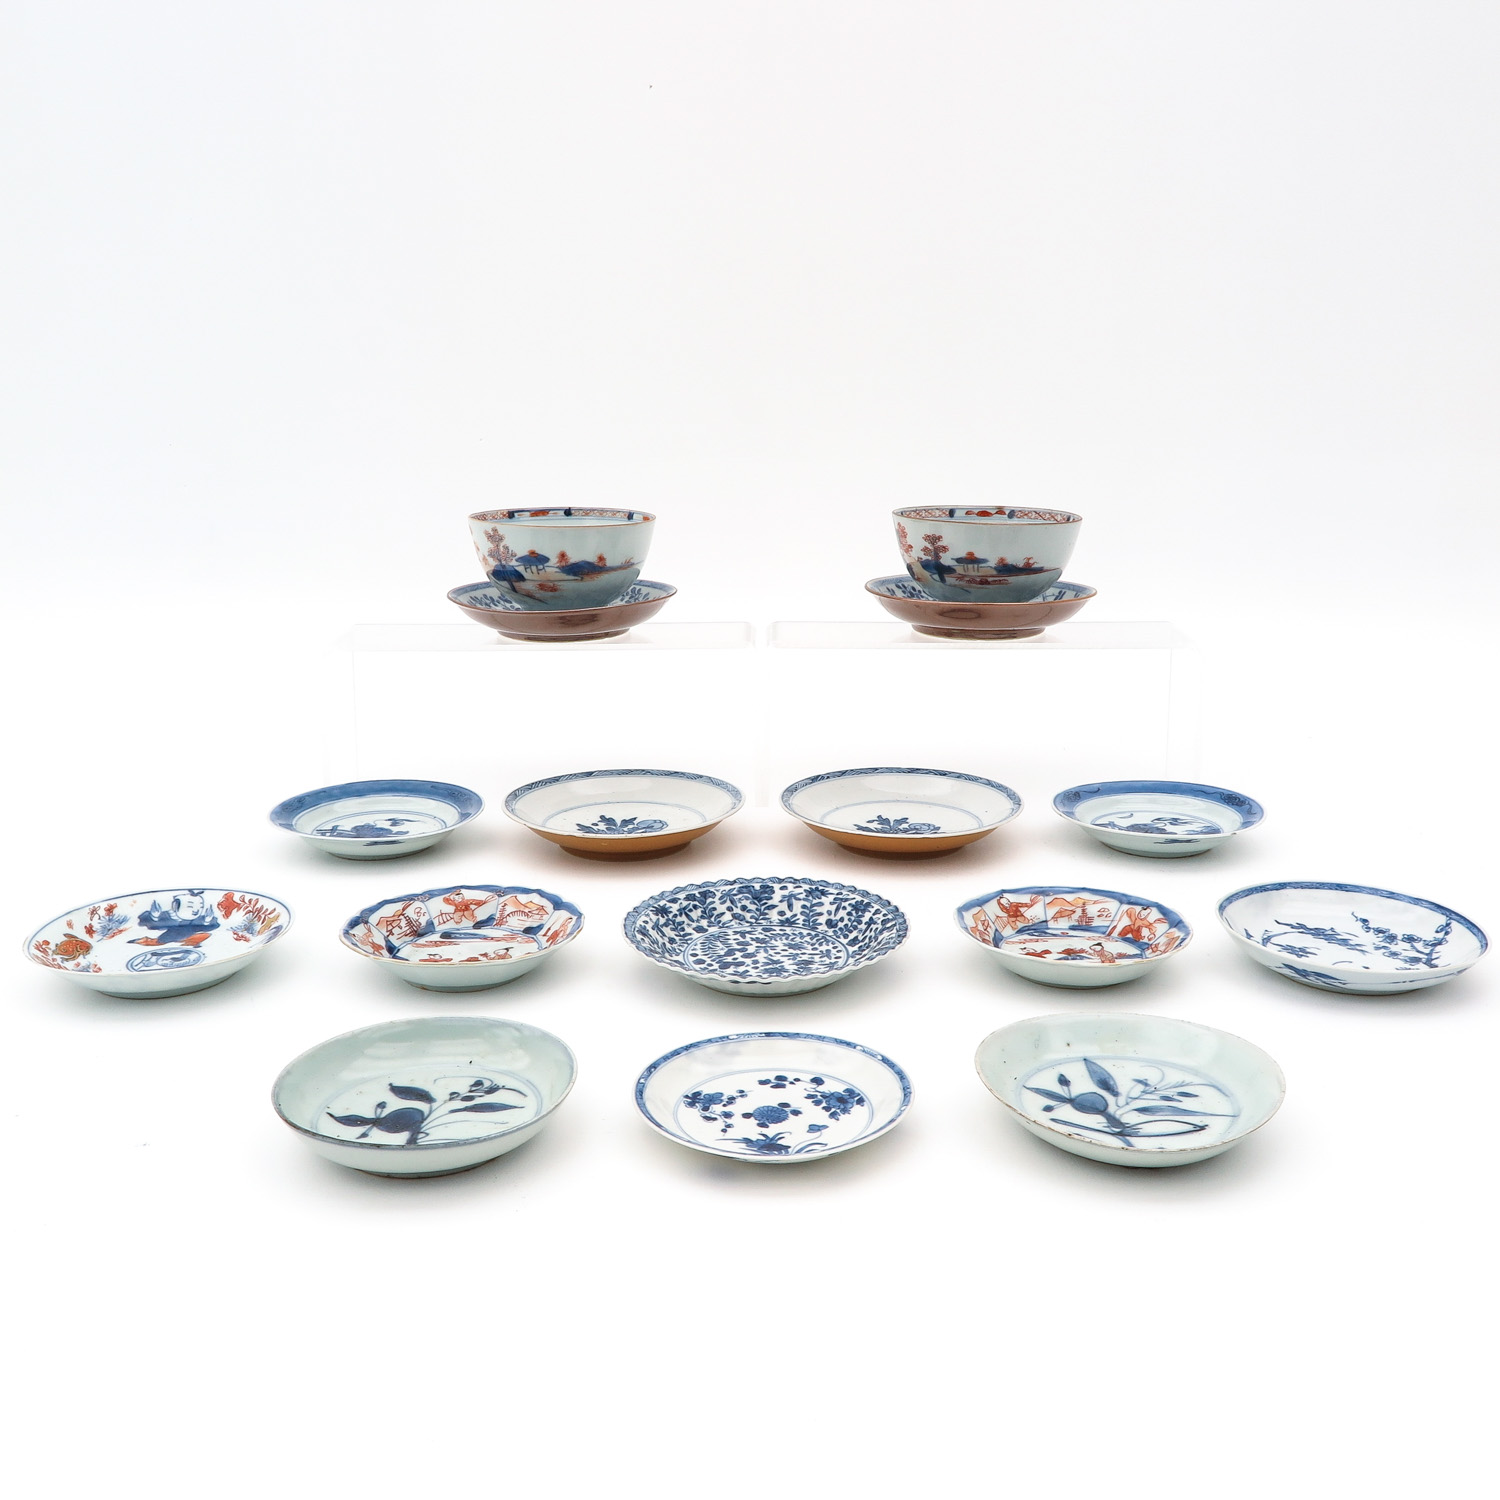 A Diverse Collection of Porcelain - Image 2 of 8